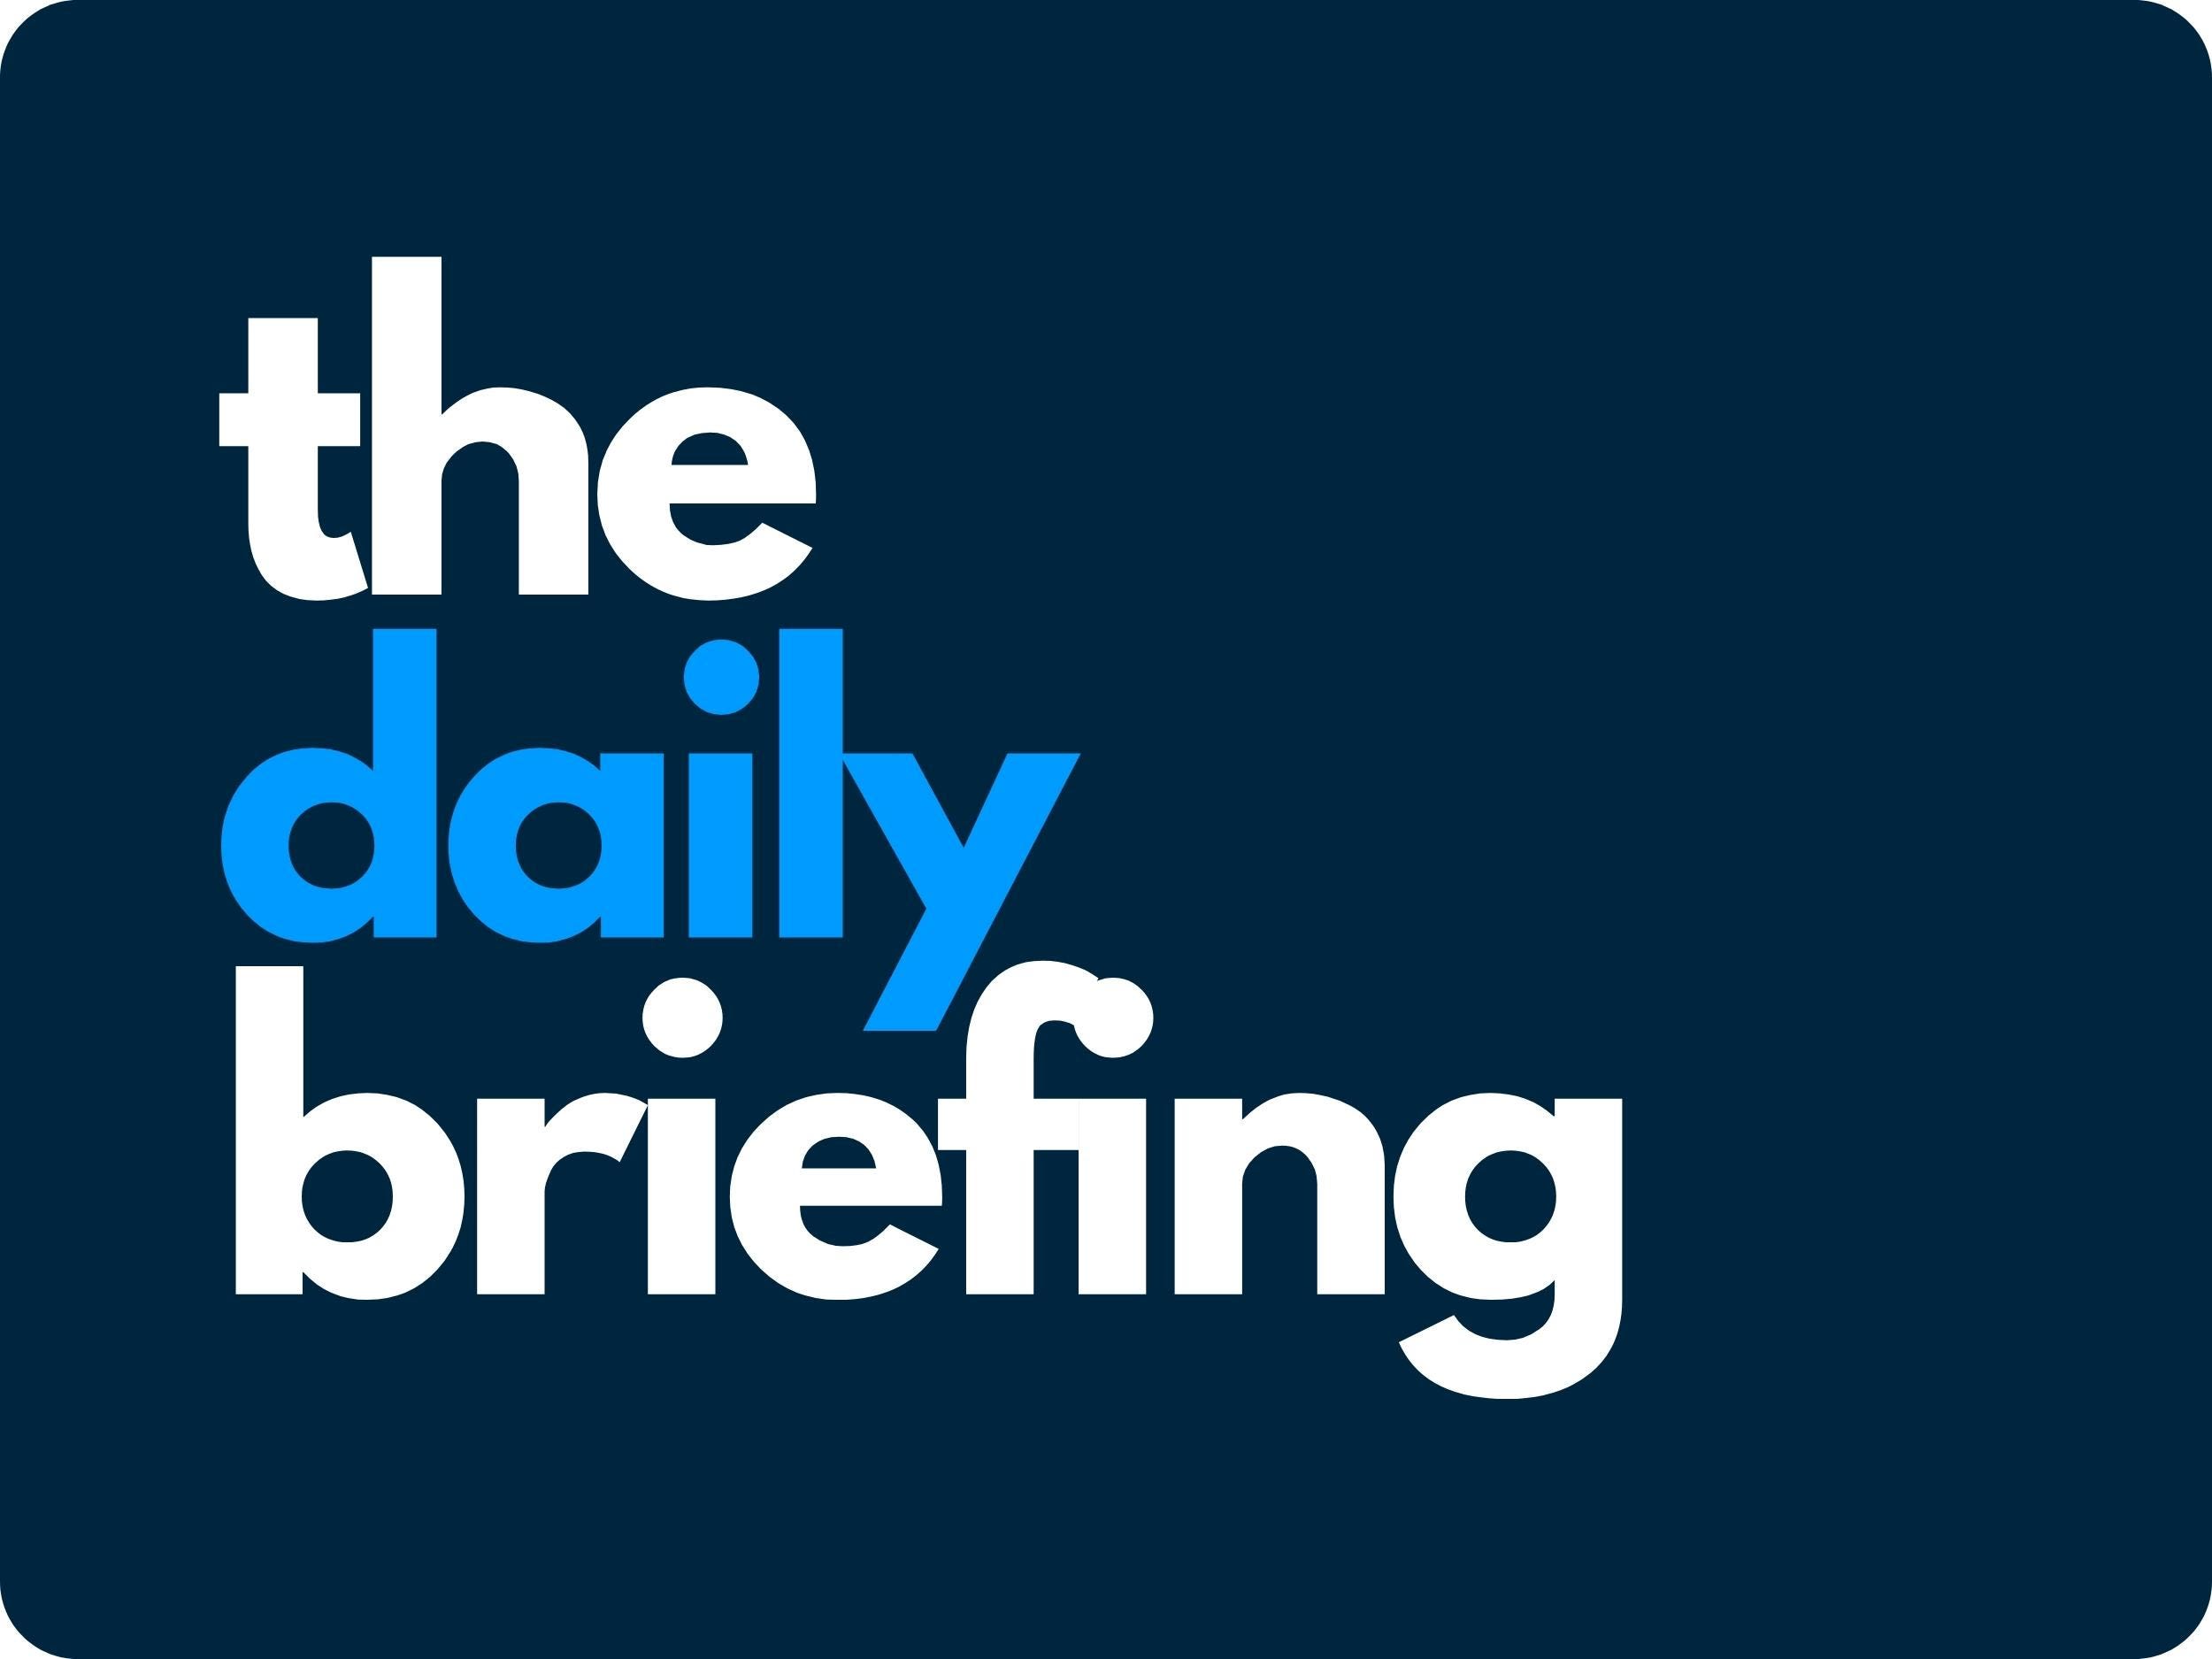 Lifestyle of living at the mall, Memorial Day events: Today's top stories | Daily Briefing